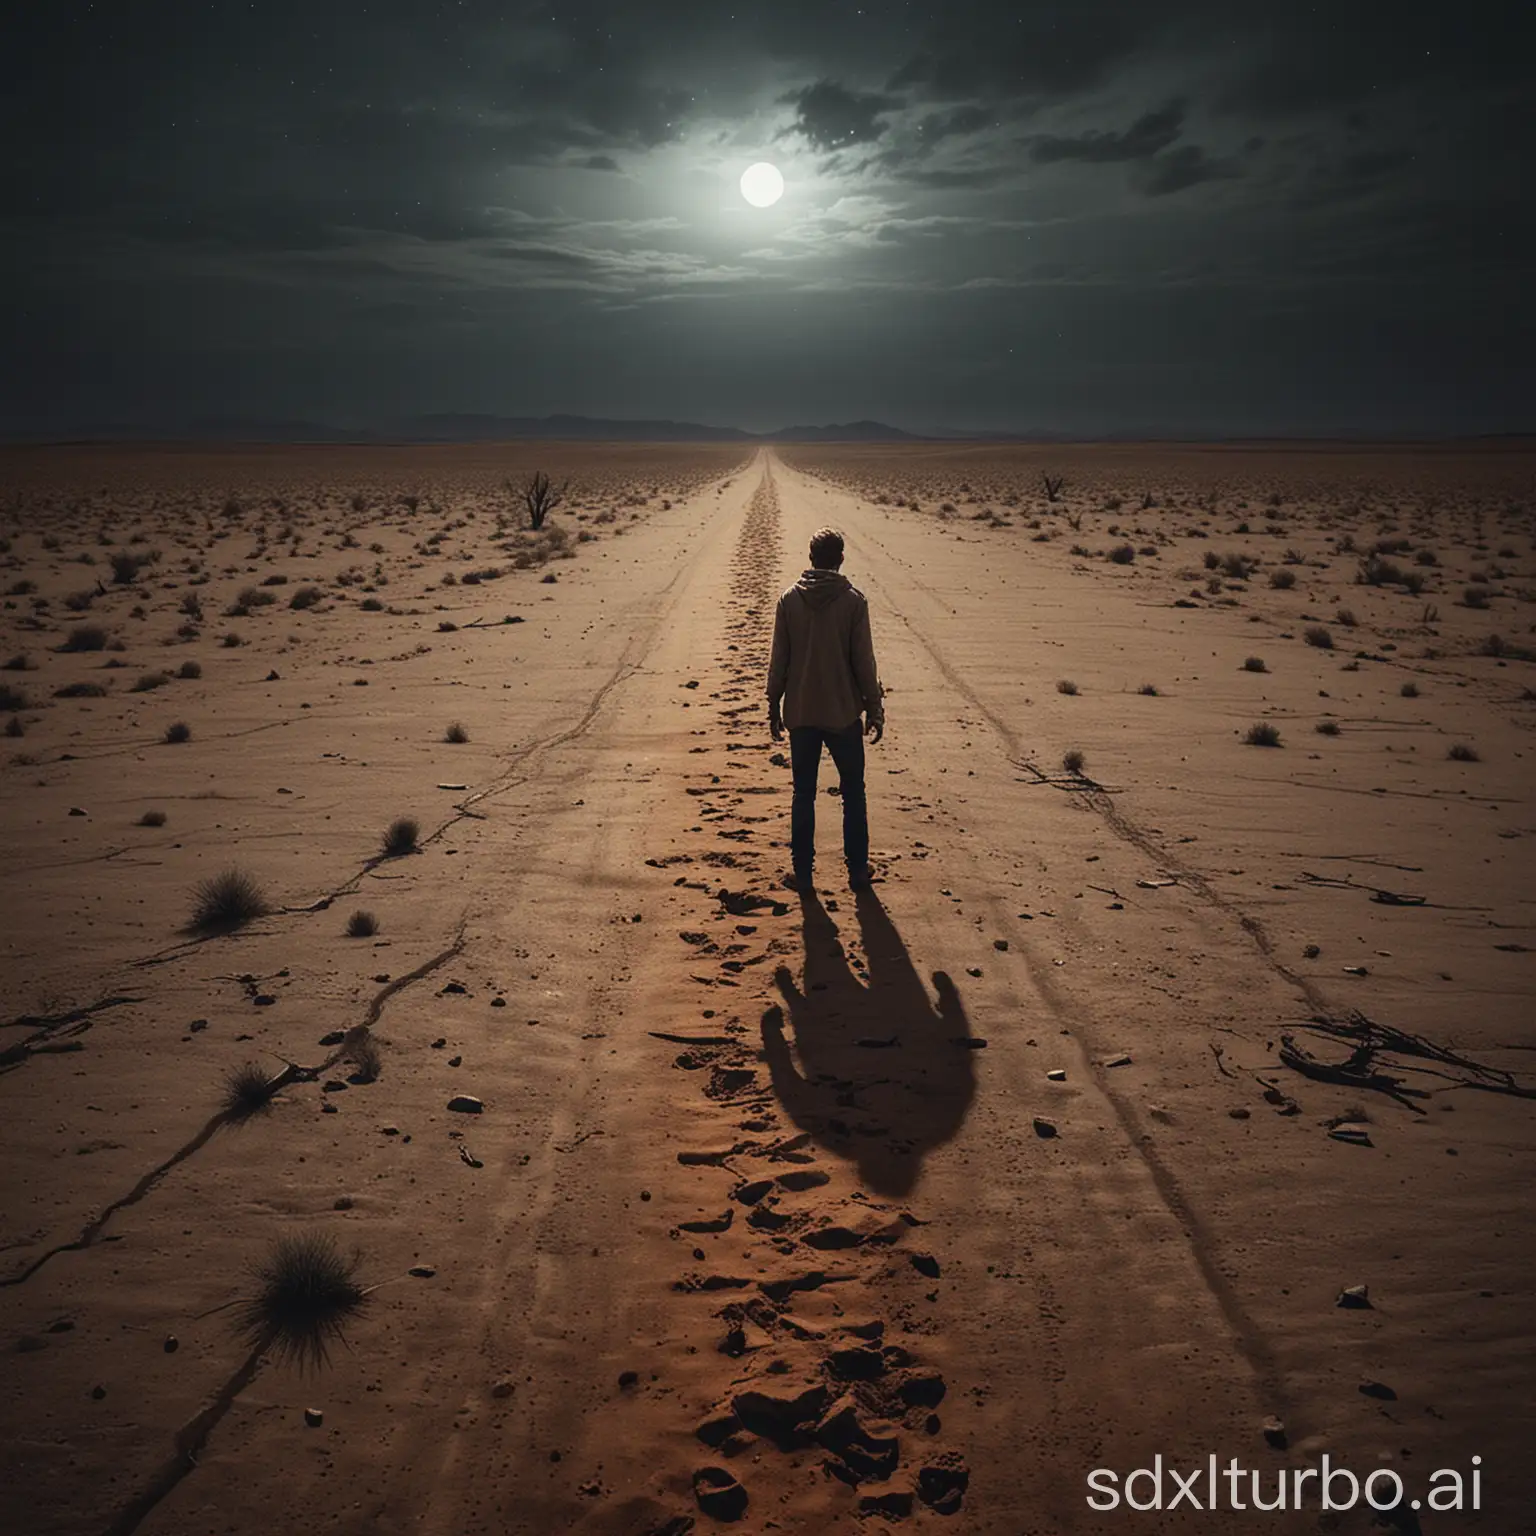 Create a high resolution, scary image about "true middle of nowhere horror stories"? The image must be photorealistic, show a man alone in the middle of a dry desert shot from far away, man in the middle of nowhere shot from far away, picture taken from far away, alone, in the middle of nowhere, dry desert, sketchy, atmospheric, catchy, night time, night lights, vibrant colors, must pop and catch attention. No horror, no gore, no monsters, the image must be photorealistic.